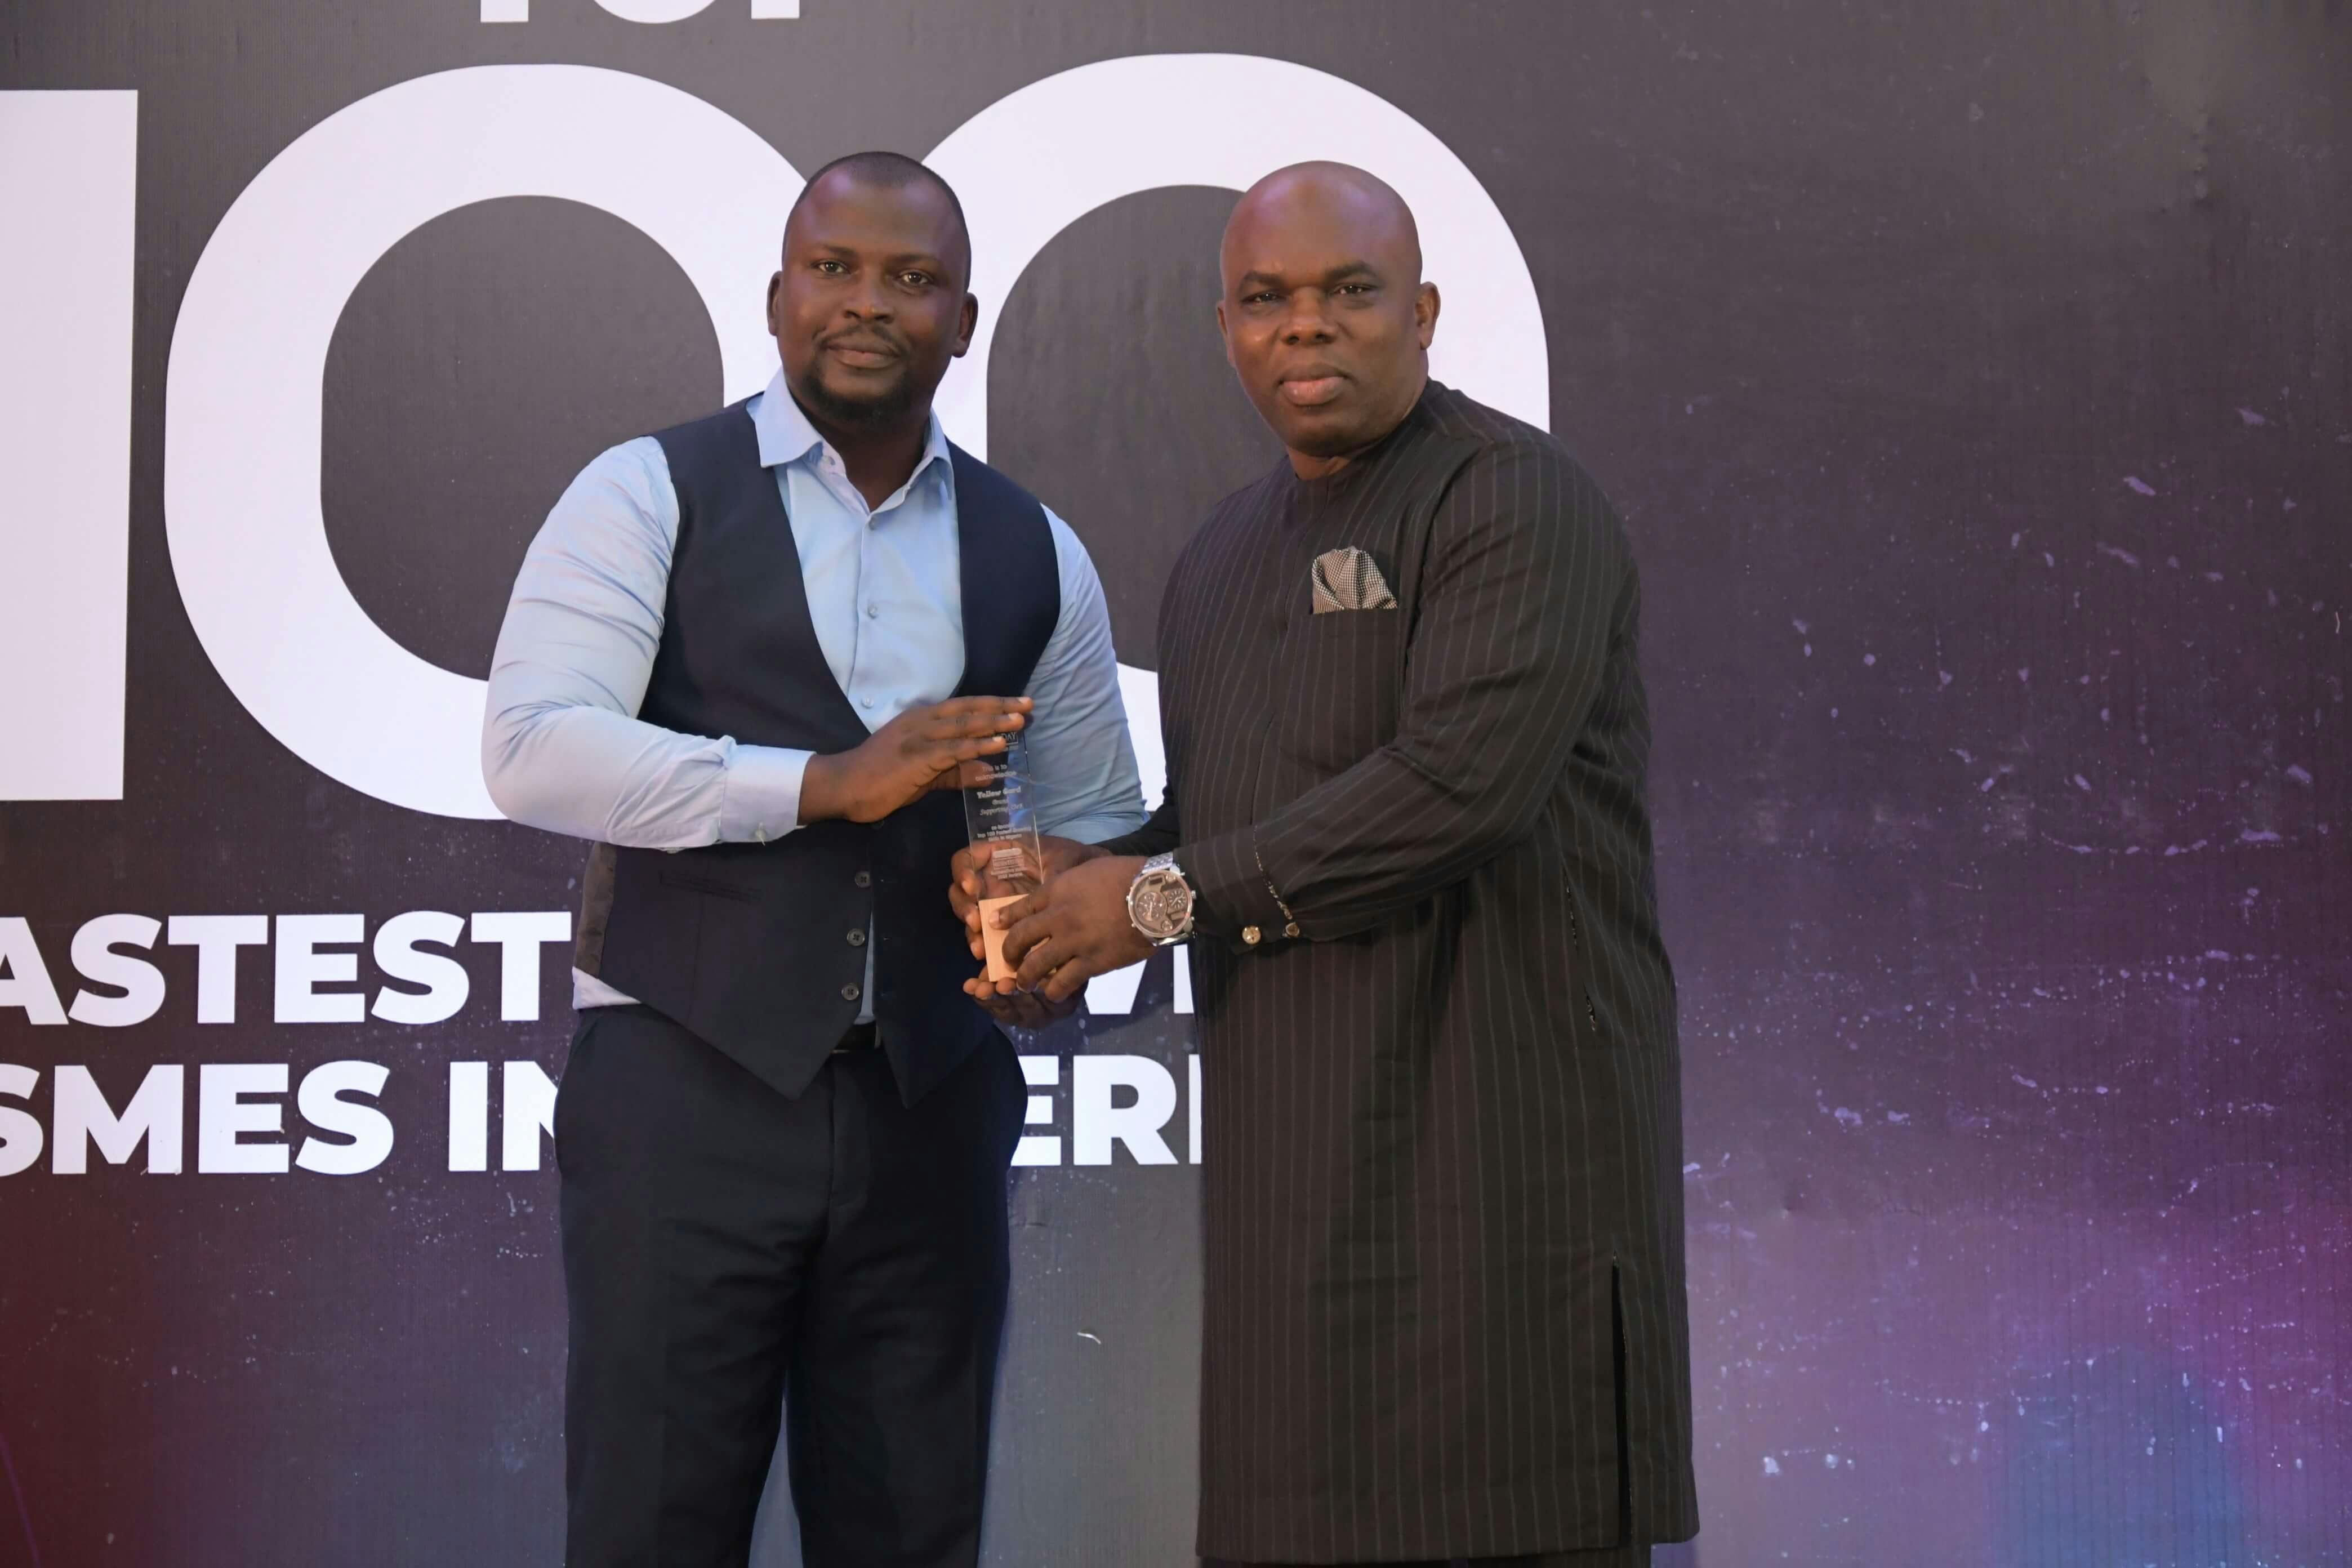 Yellow Card Named "One of the top 100 brands supporting SMEs in Nigeria" by Business Day